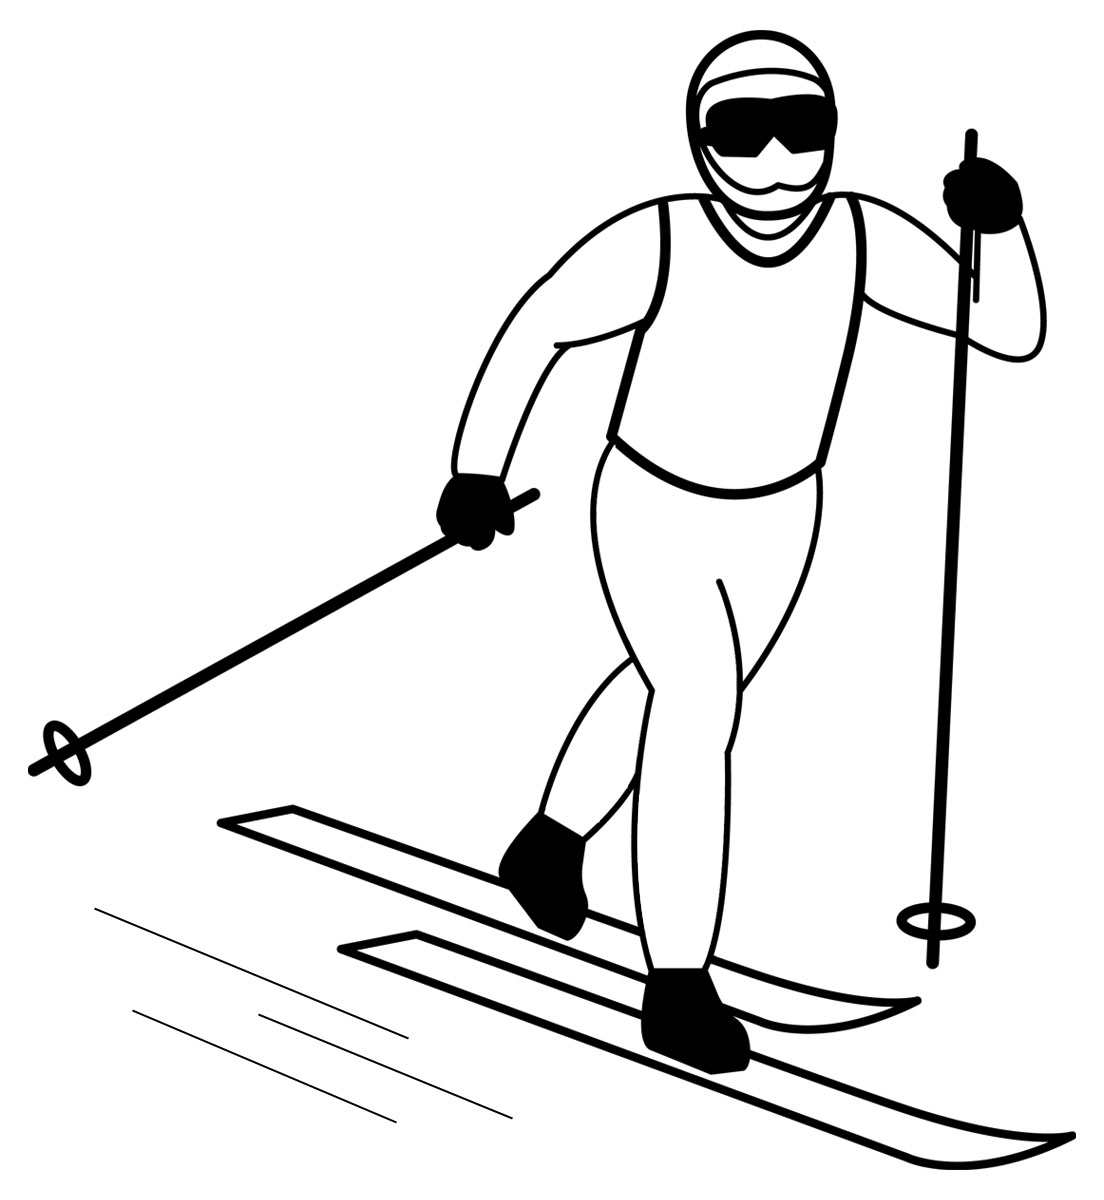 Clip Art  Cross Country Skiing   Clipart Panda   Free Clipart Images